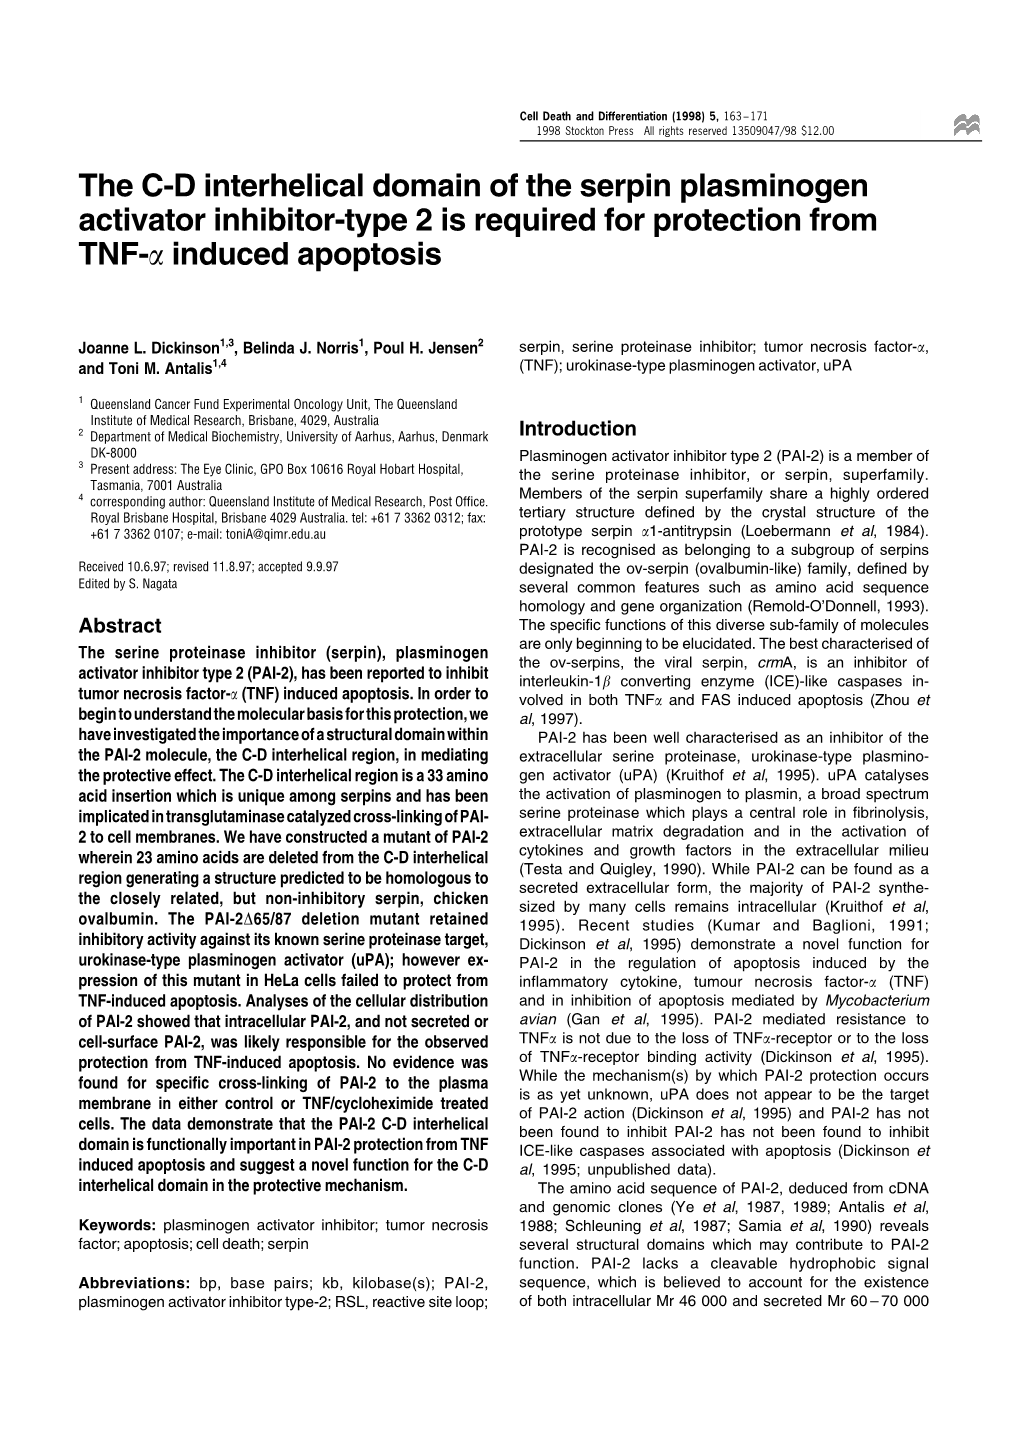 The C-D Interhelical Domain of the Serpin Plasminogen Activator Inhibitor-Type 2 Is Required for Protection from TNF-A Induced Apoptosis